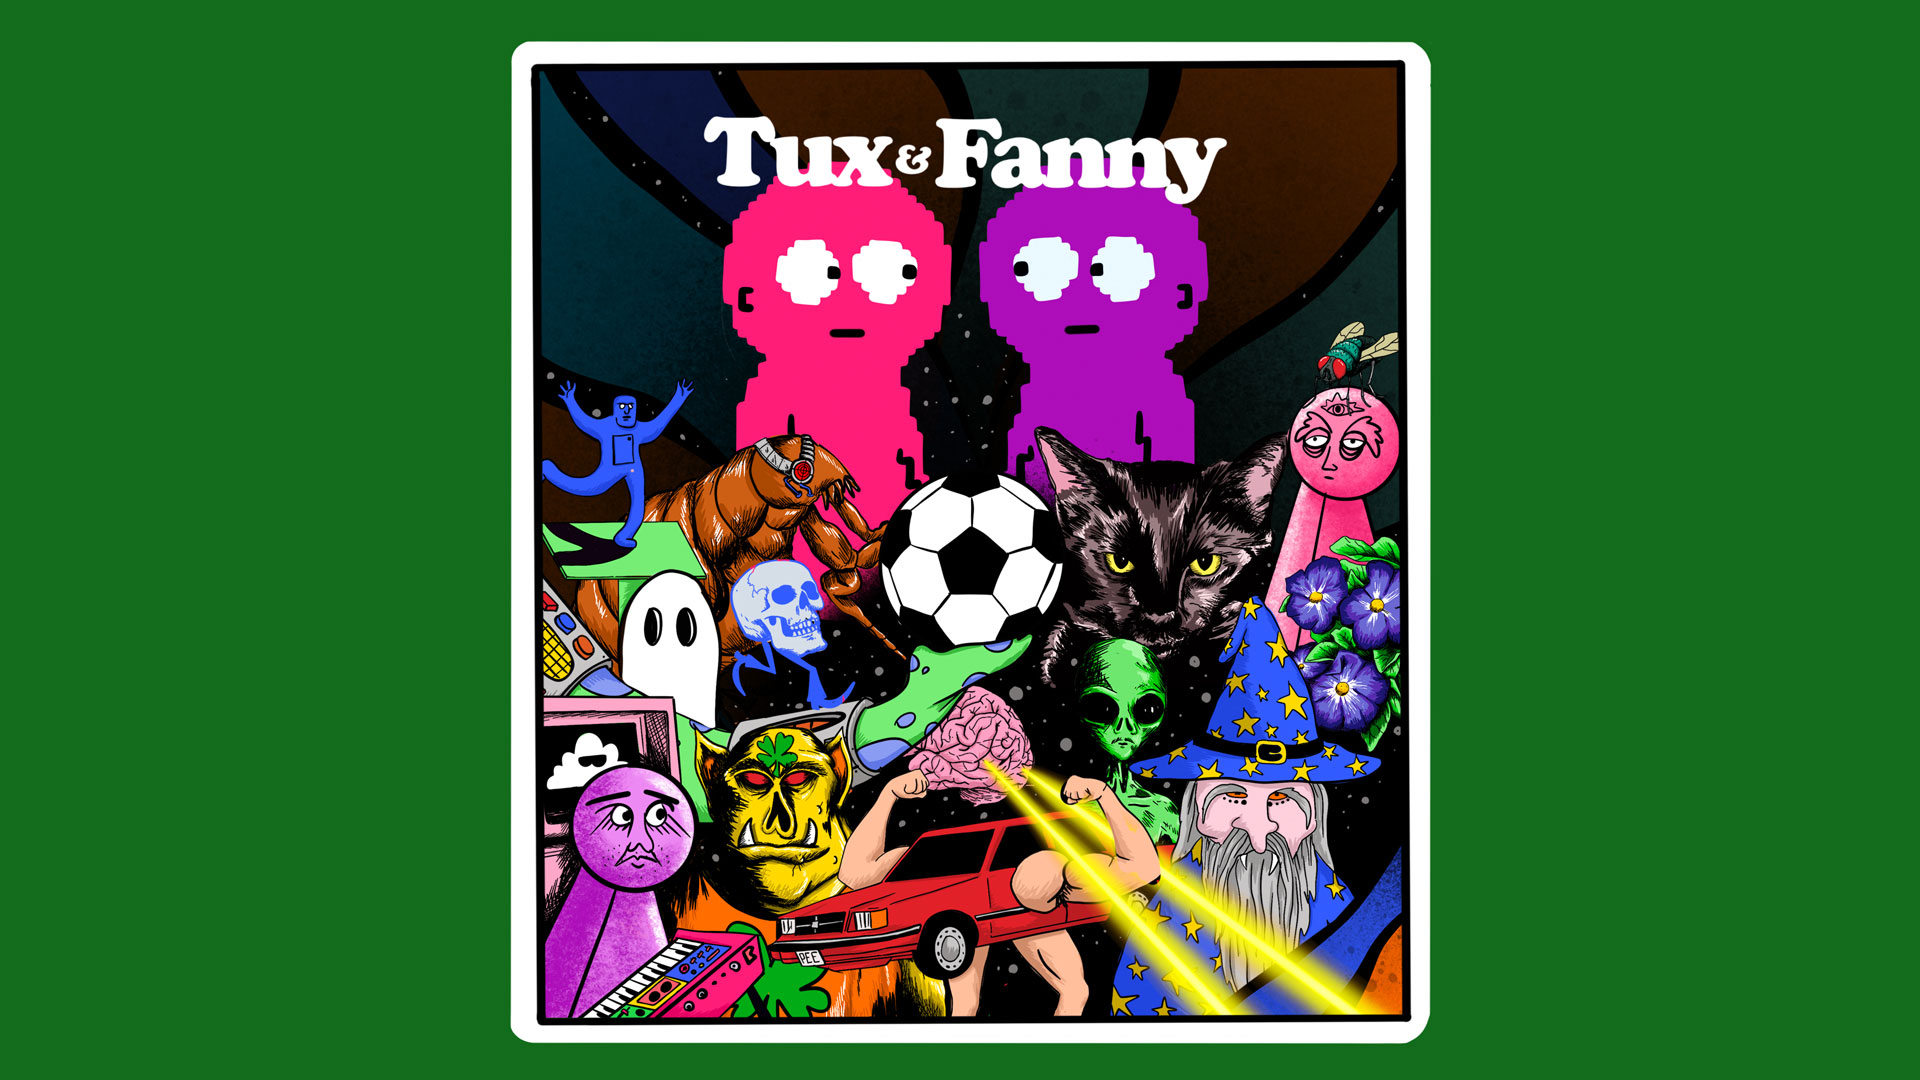 Video For Tux and Fanny Will Surprise You at Every Turn